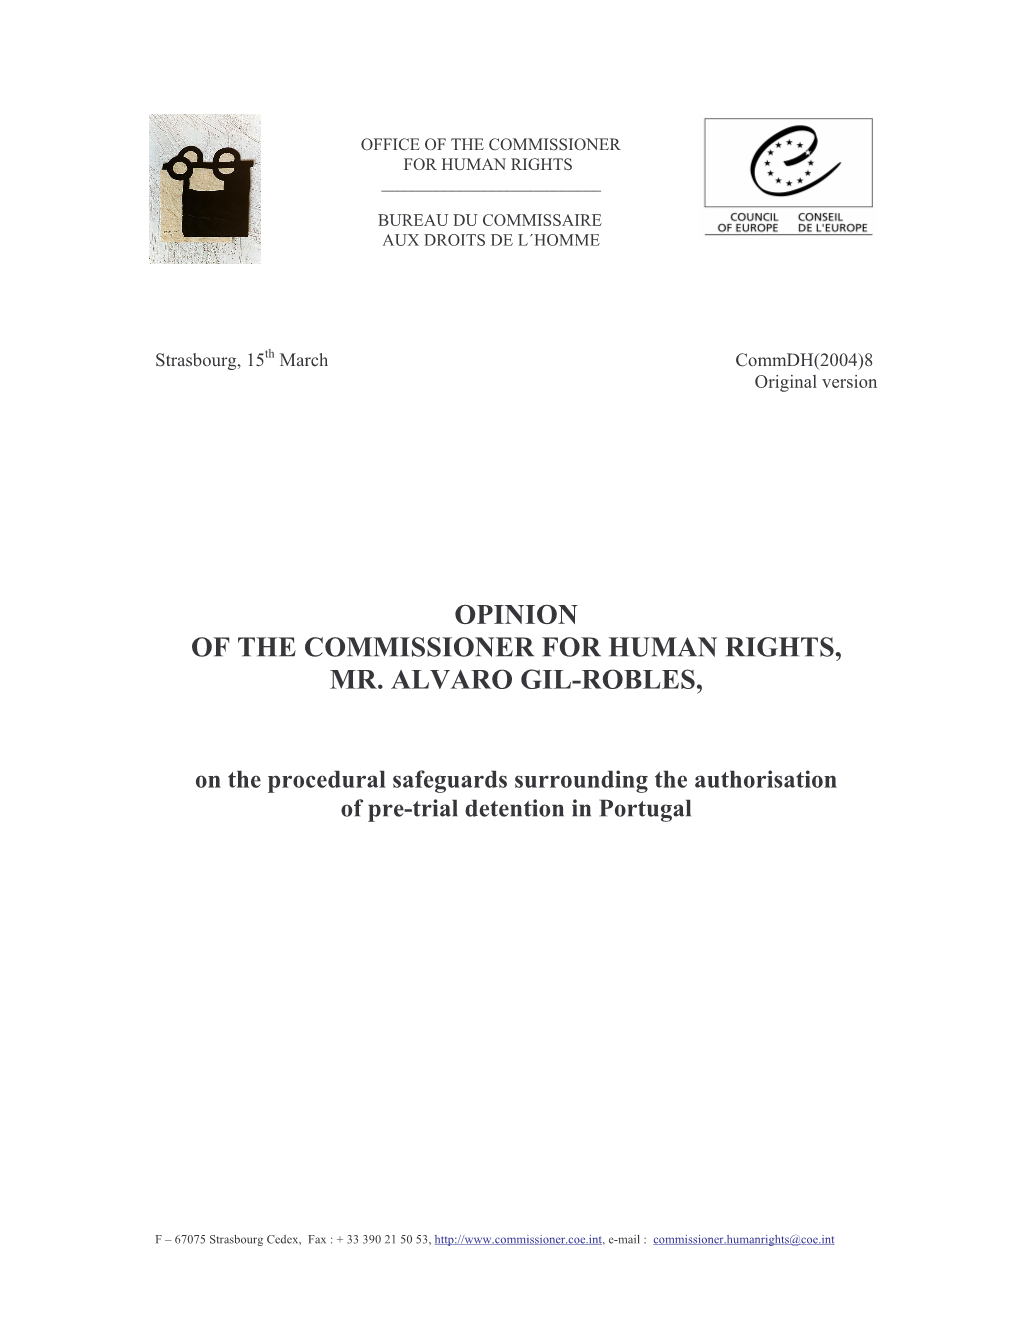 Opinion of the Commissioner for Human Rights, Mr